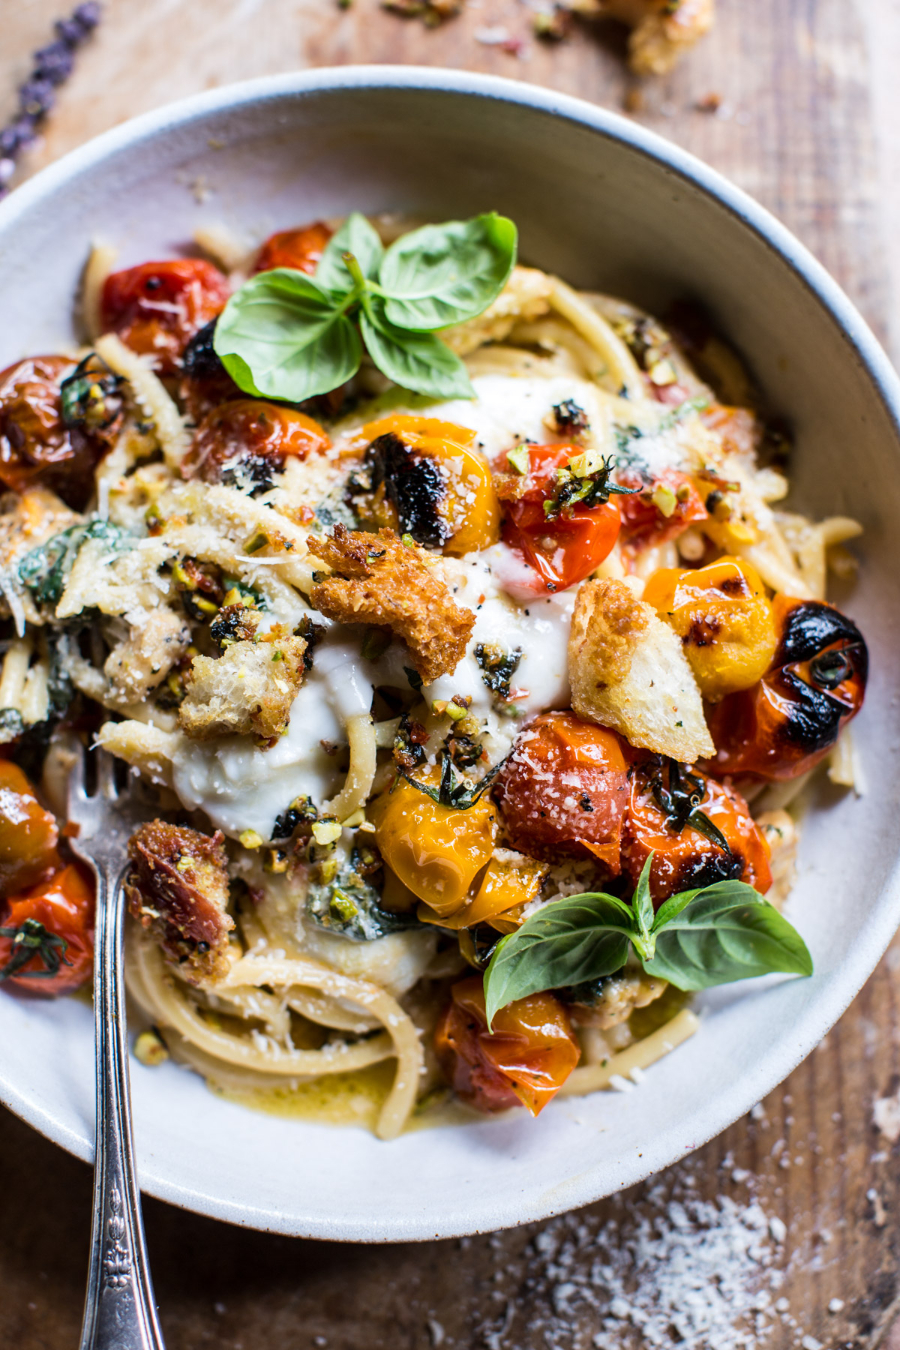 Charred-Tomato-Basil-Chicken-Florentine-Pasta-with-Herb-Butter-Breadcrumbs-4